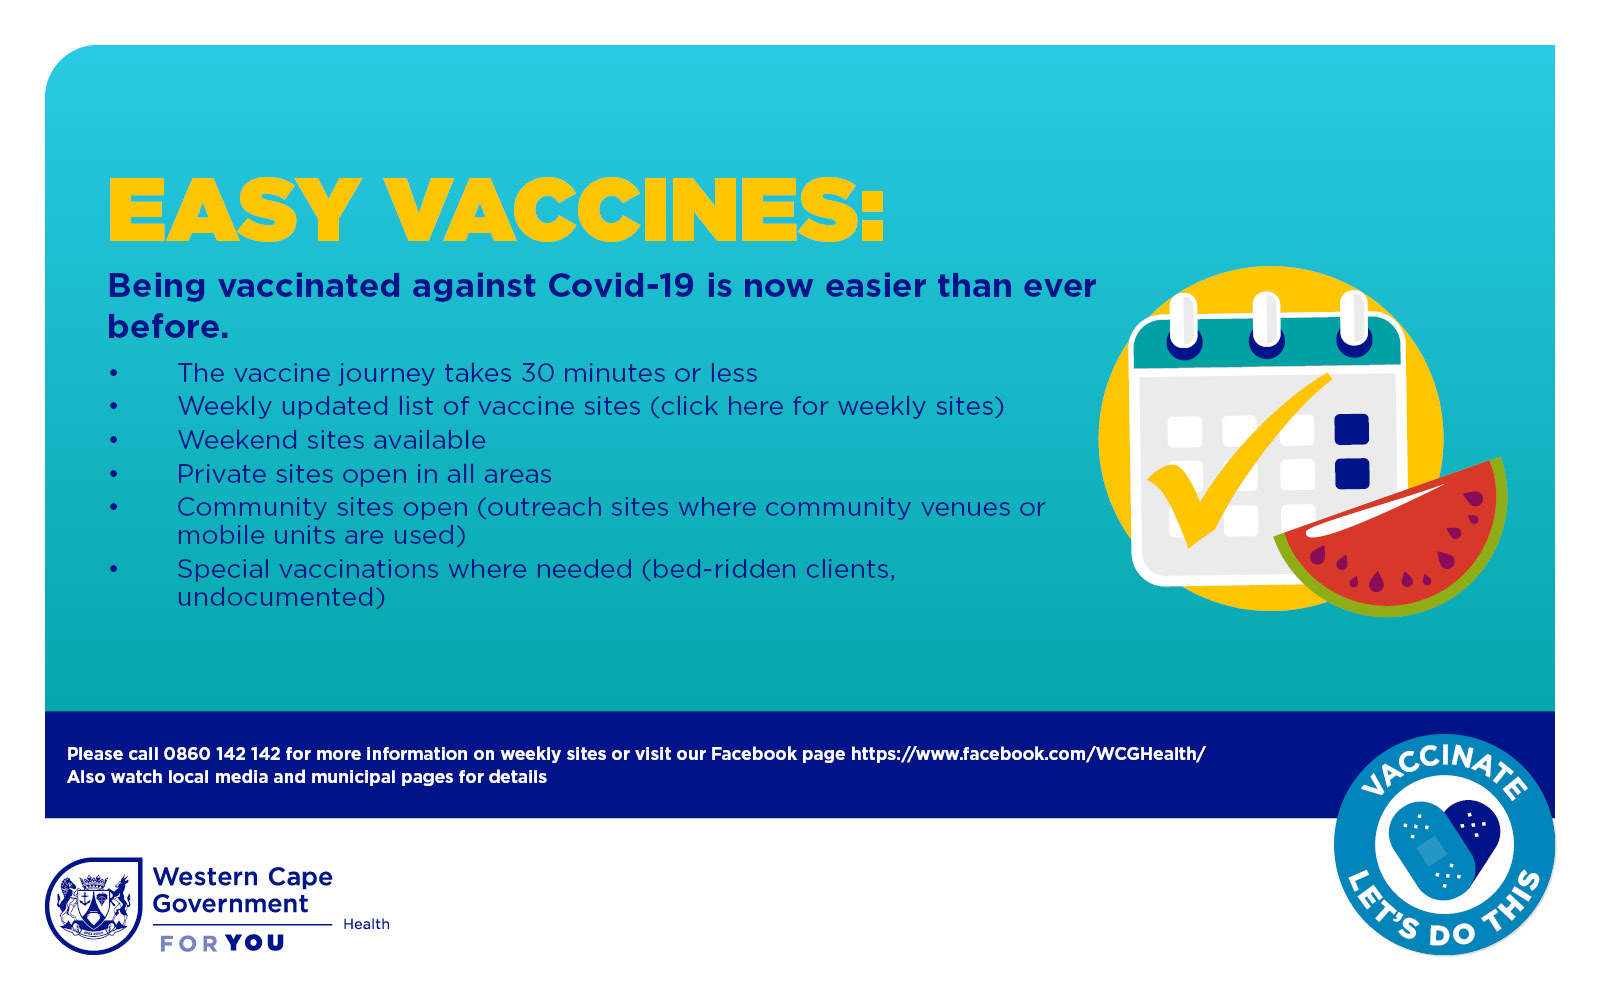 Save your summer: Easy vaccines - Getting vaccinated against Covid-19 is now even easier